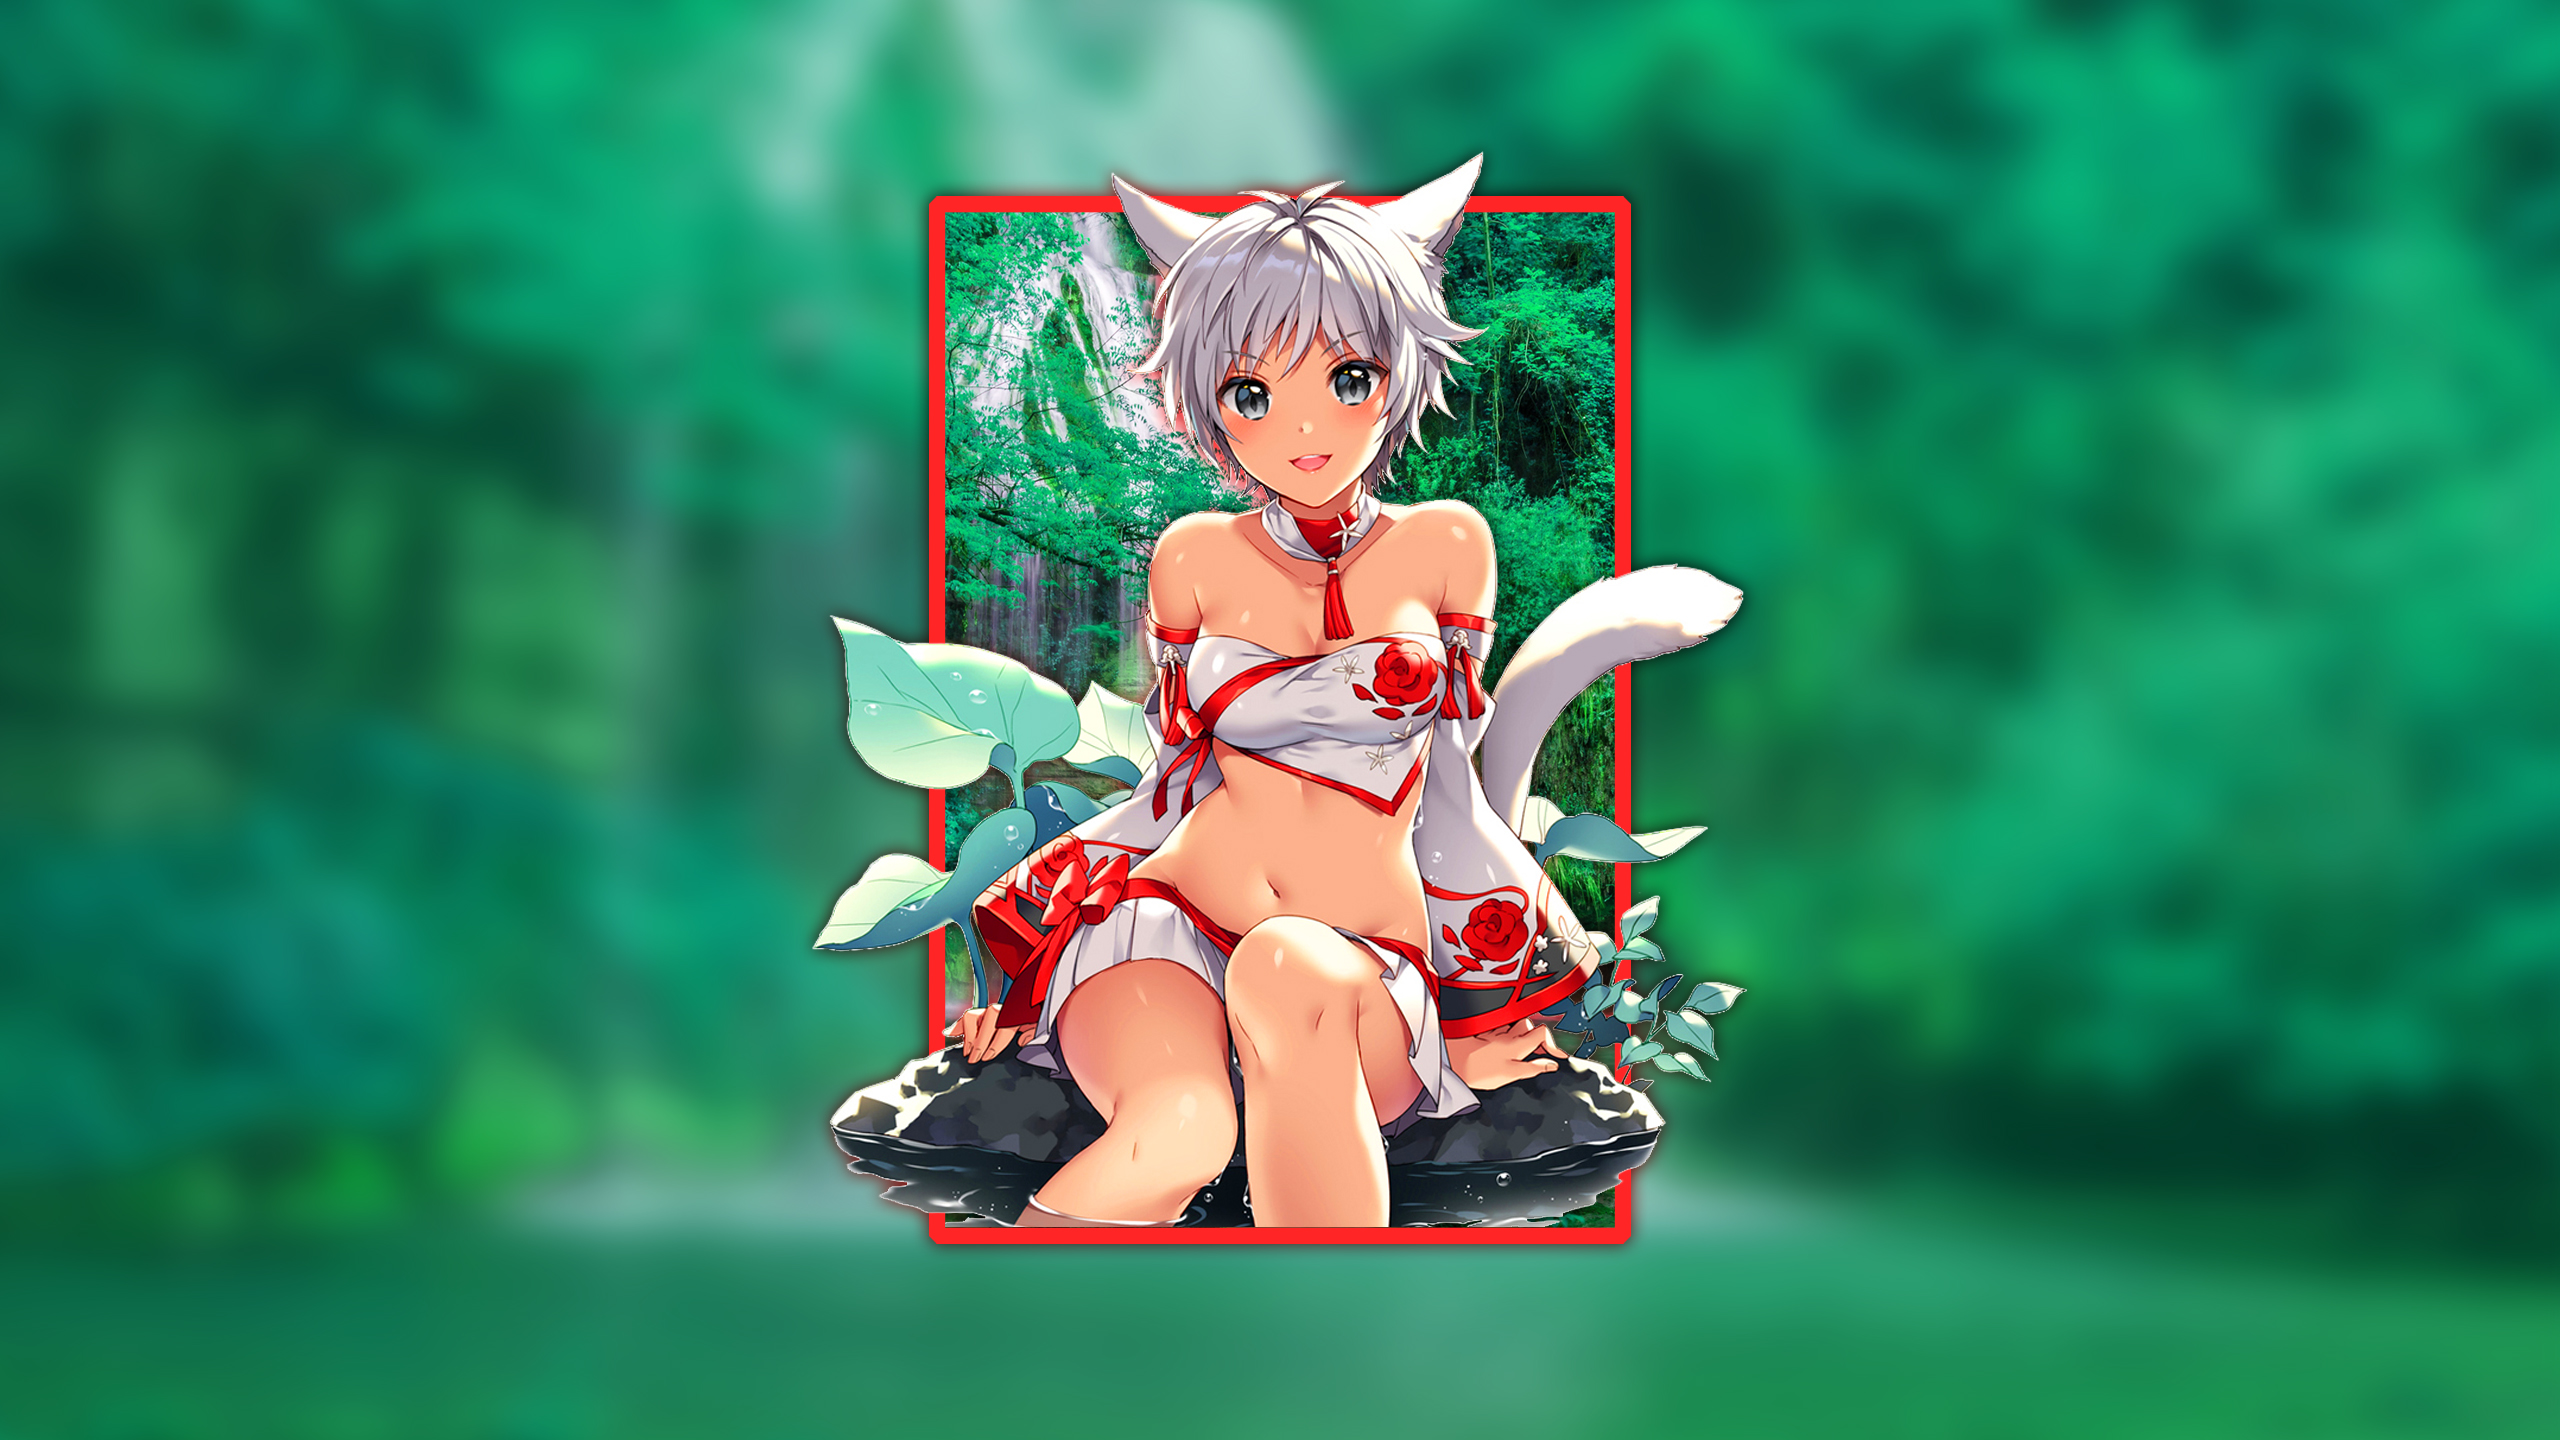 Renders In Shapes Anime Picture In Picture Neko Ears Final Fantasy Xiv 